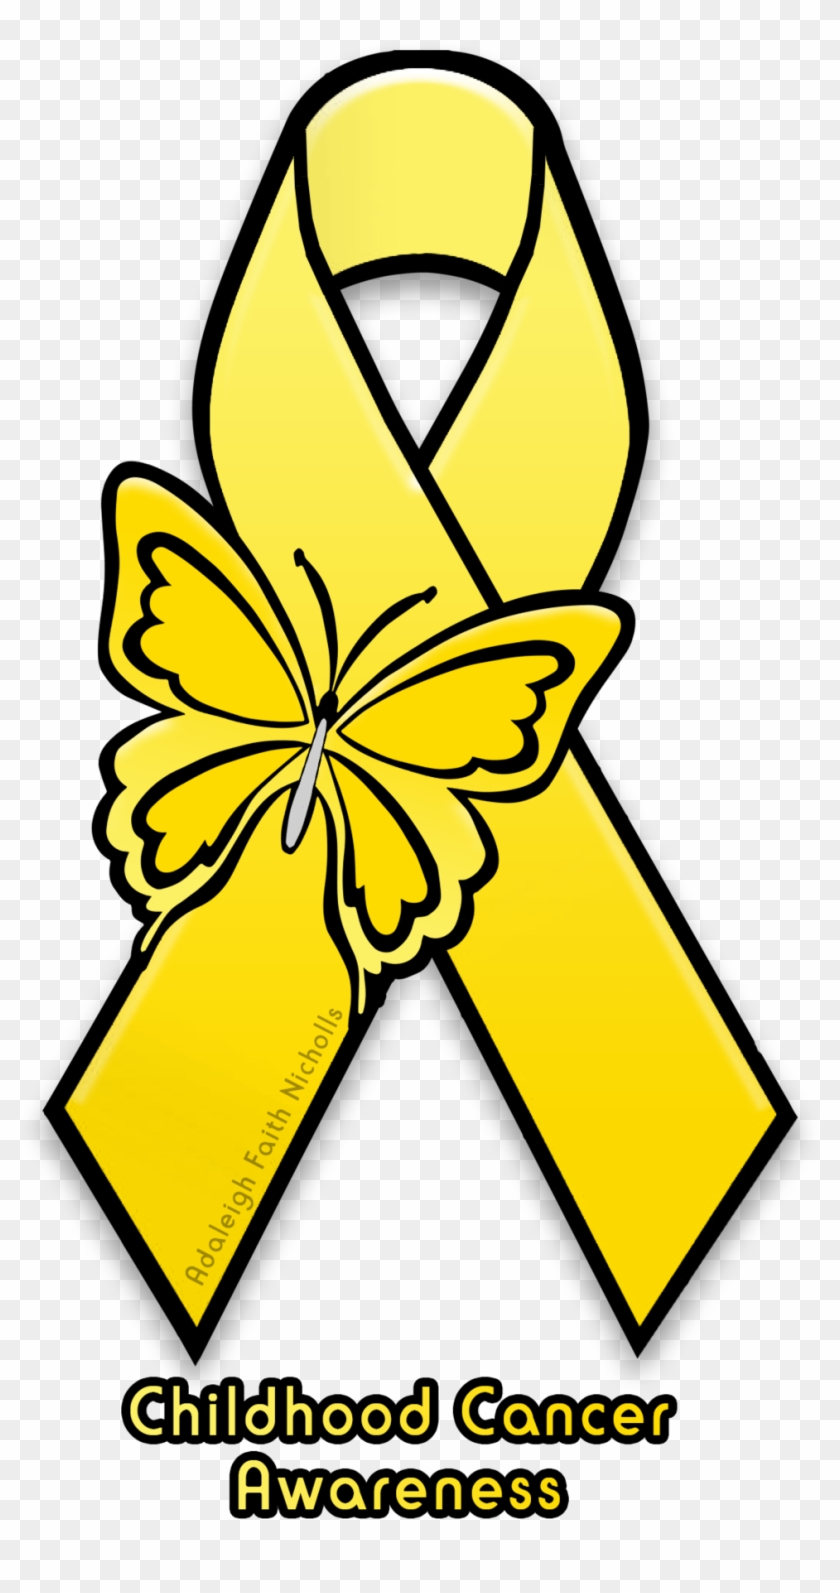 Adaleighfaith 8 2 Childhood Cancer Awareness Ribbon - Mental Health Green Ribbon Png #188207